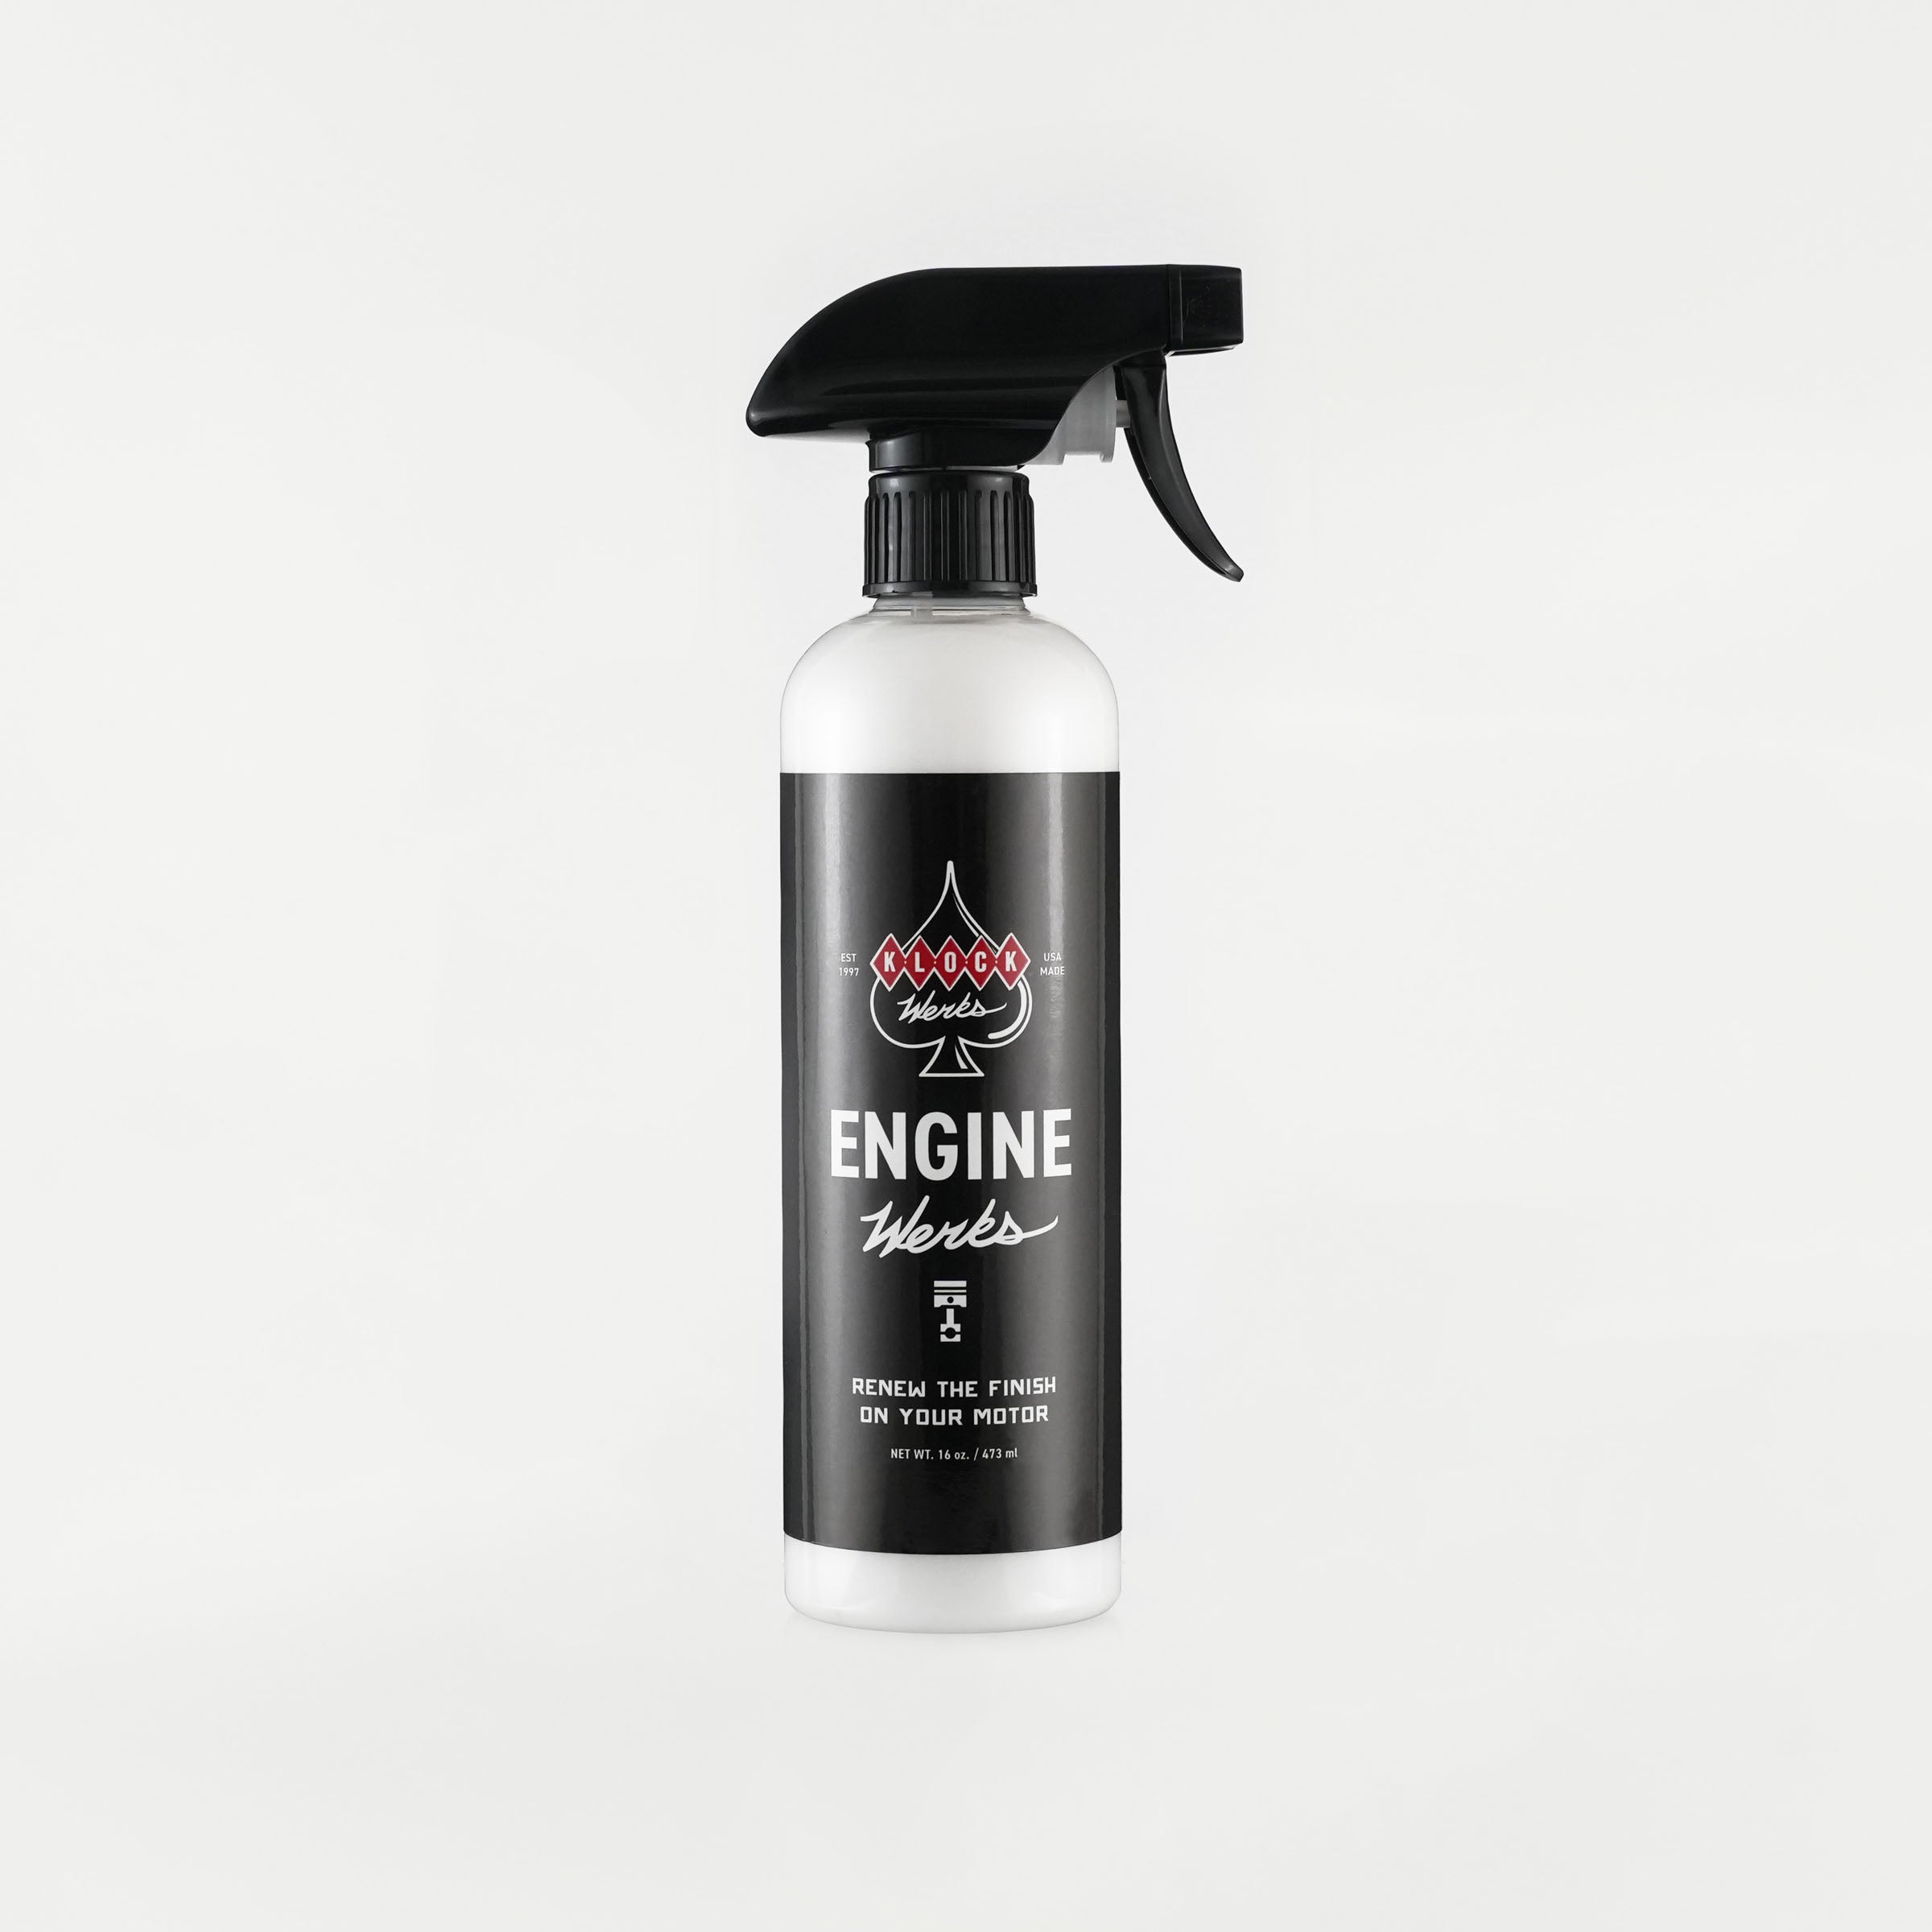 16 ounce Engine Werks cleaning product bottle(16 oz. Engine Werks)